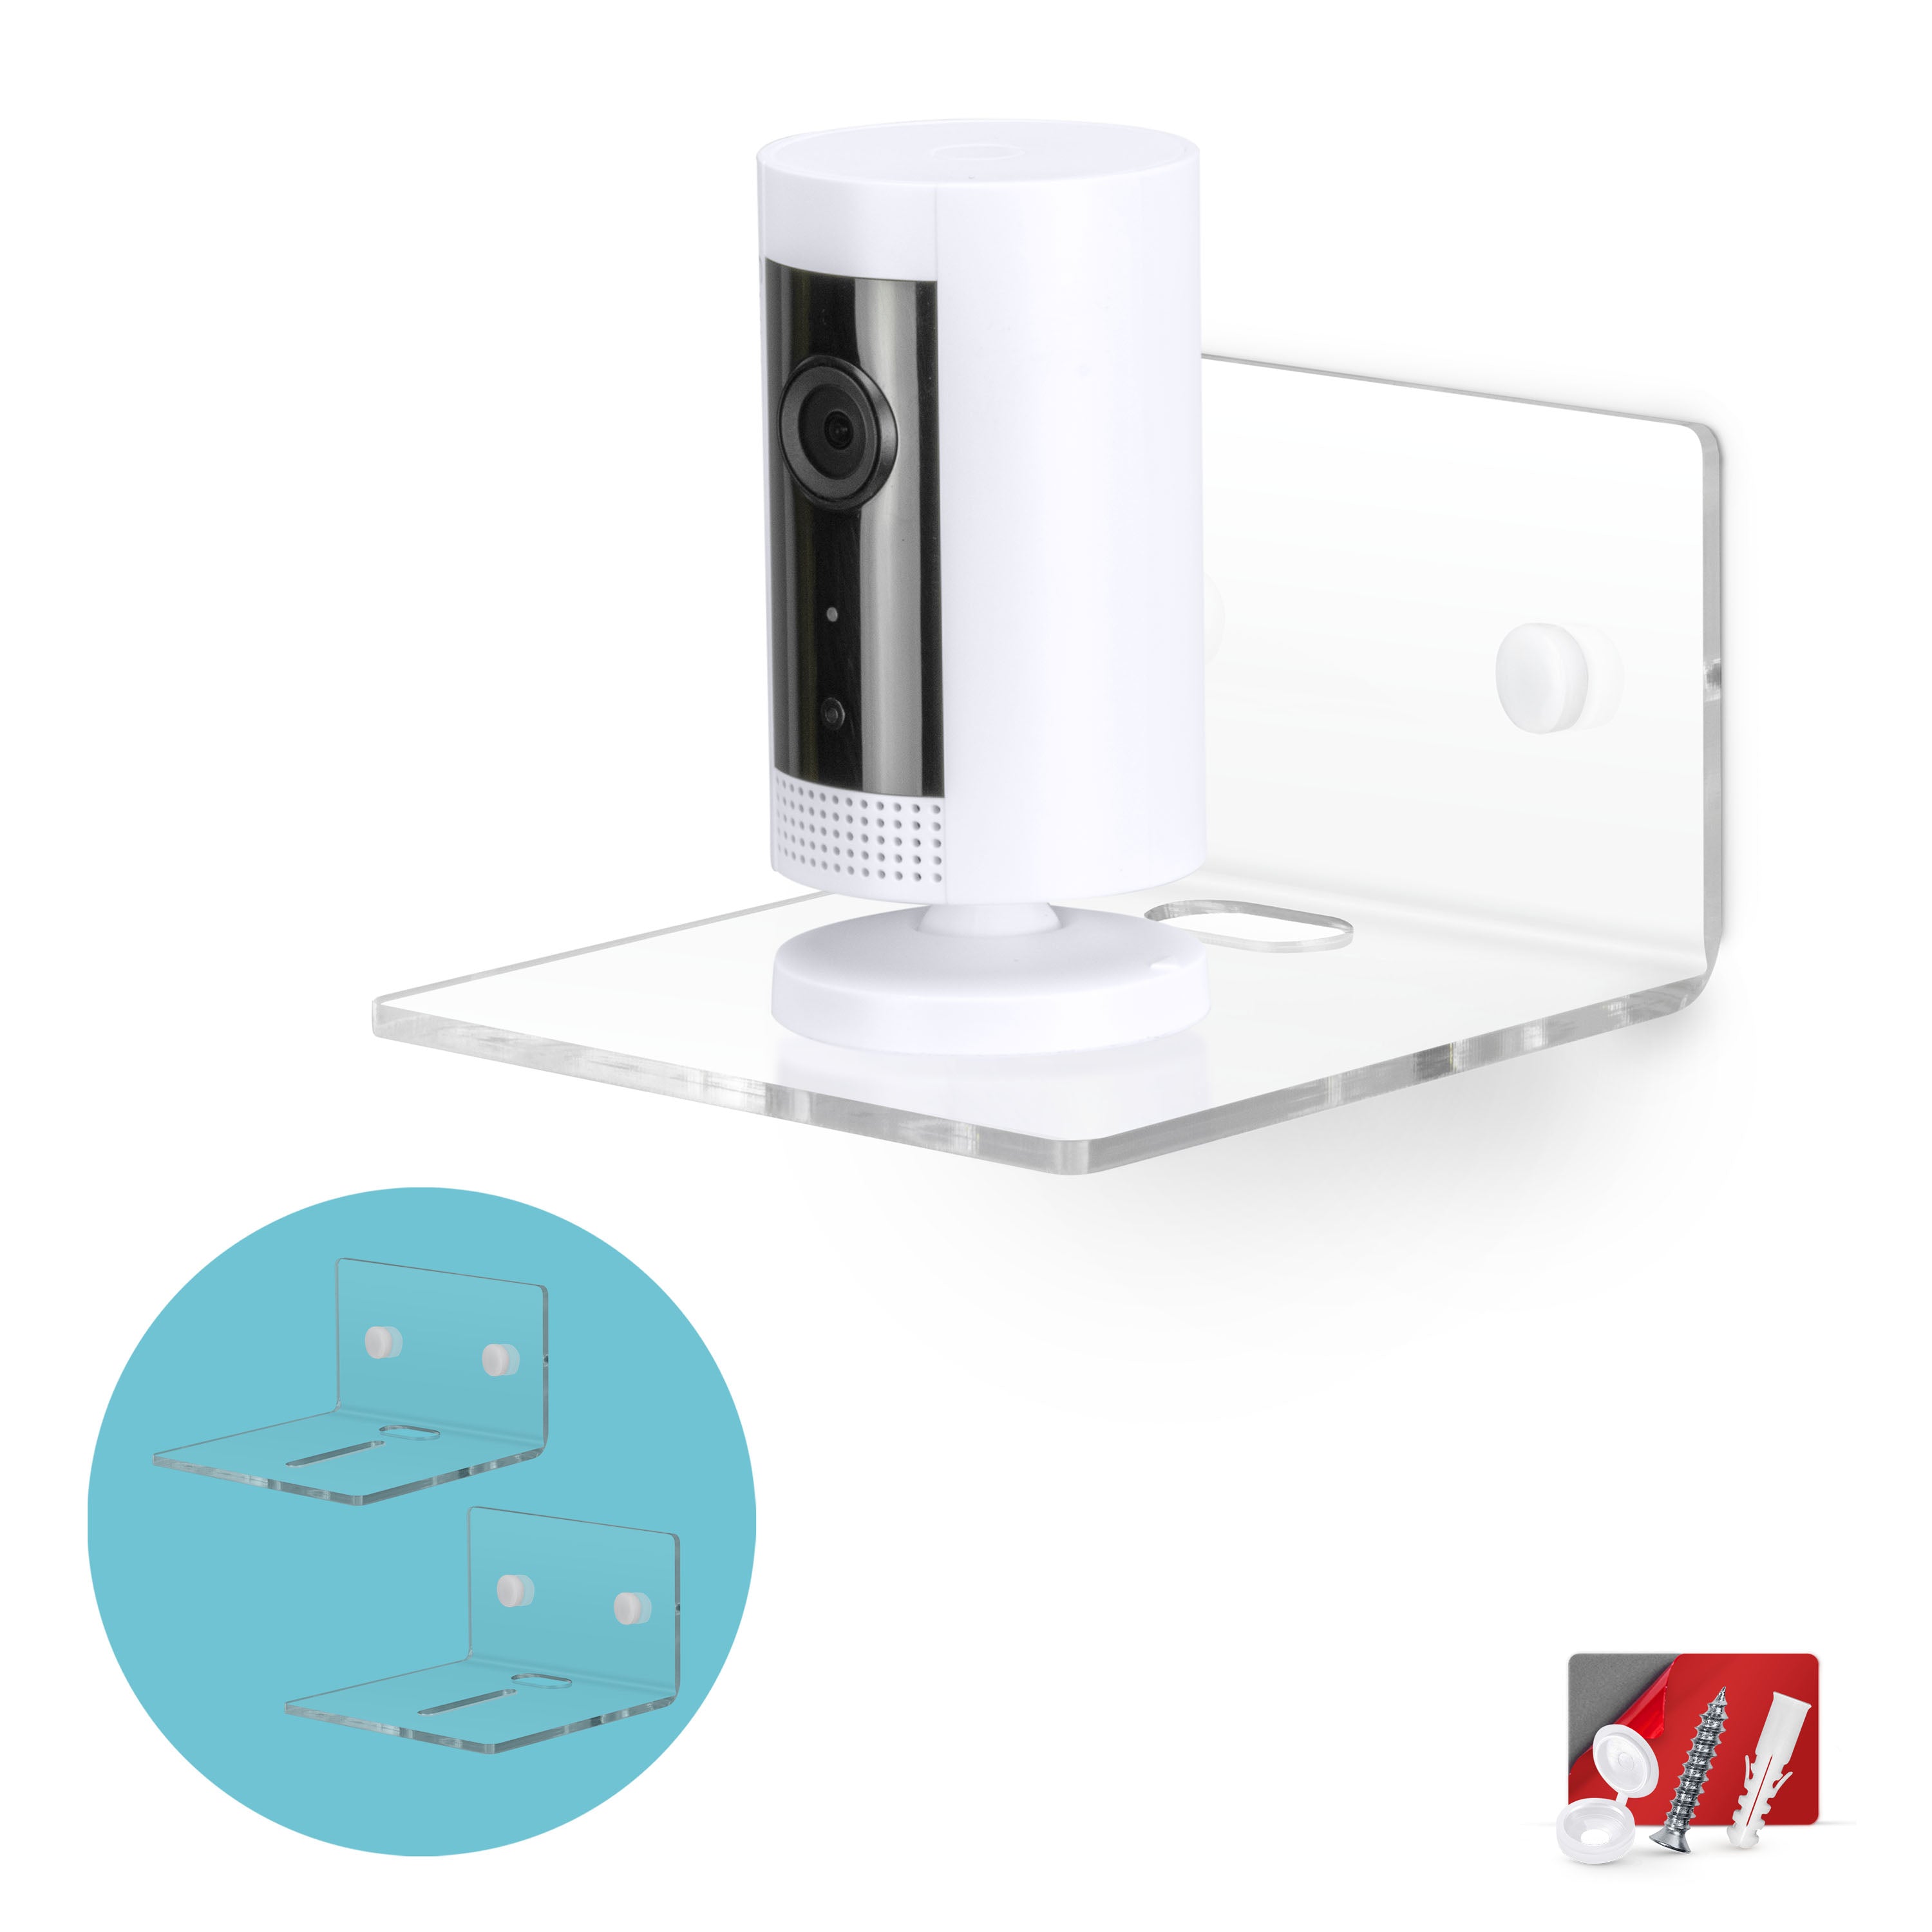 Adhesive Transparent Monitor Floating Shelf For Security Cameras